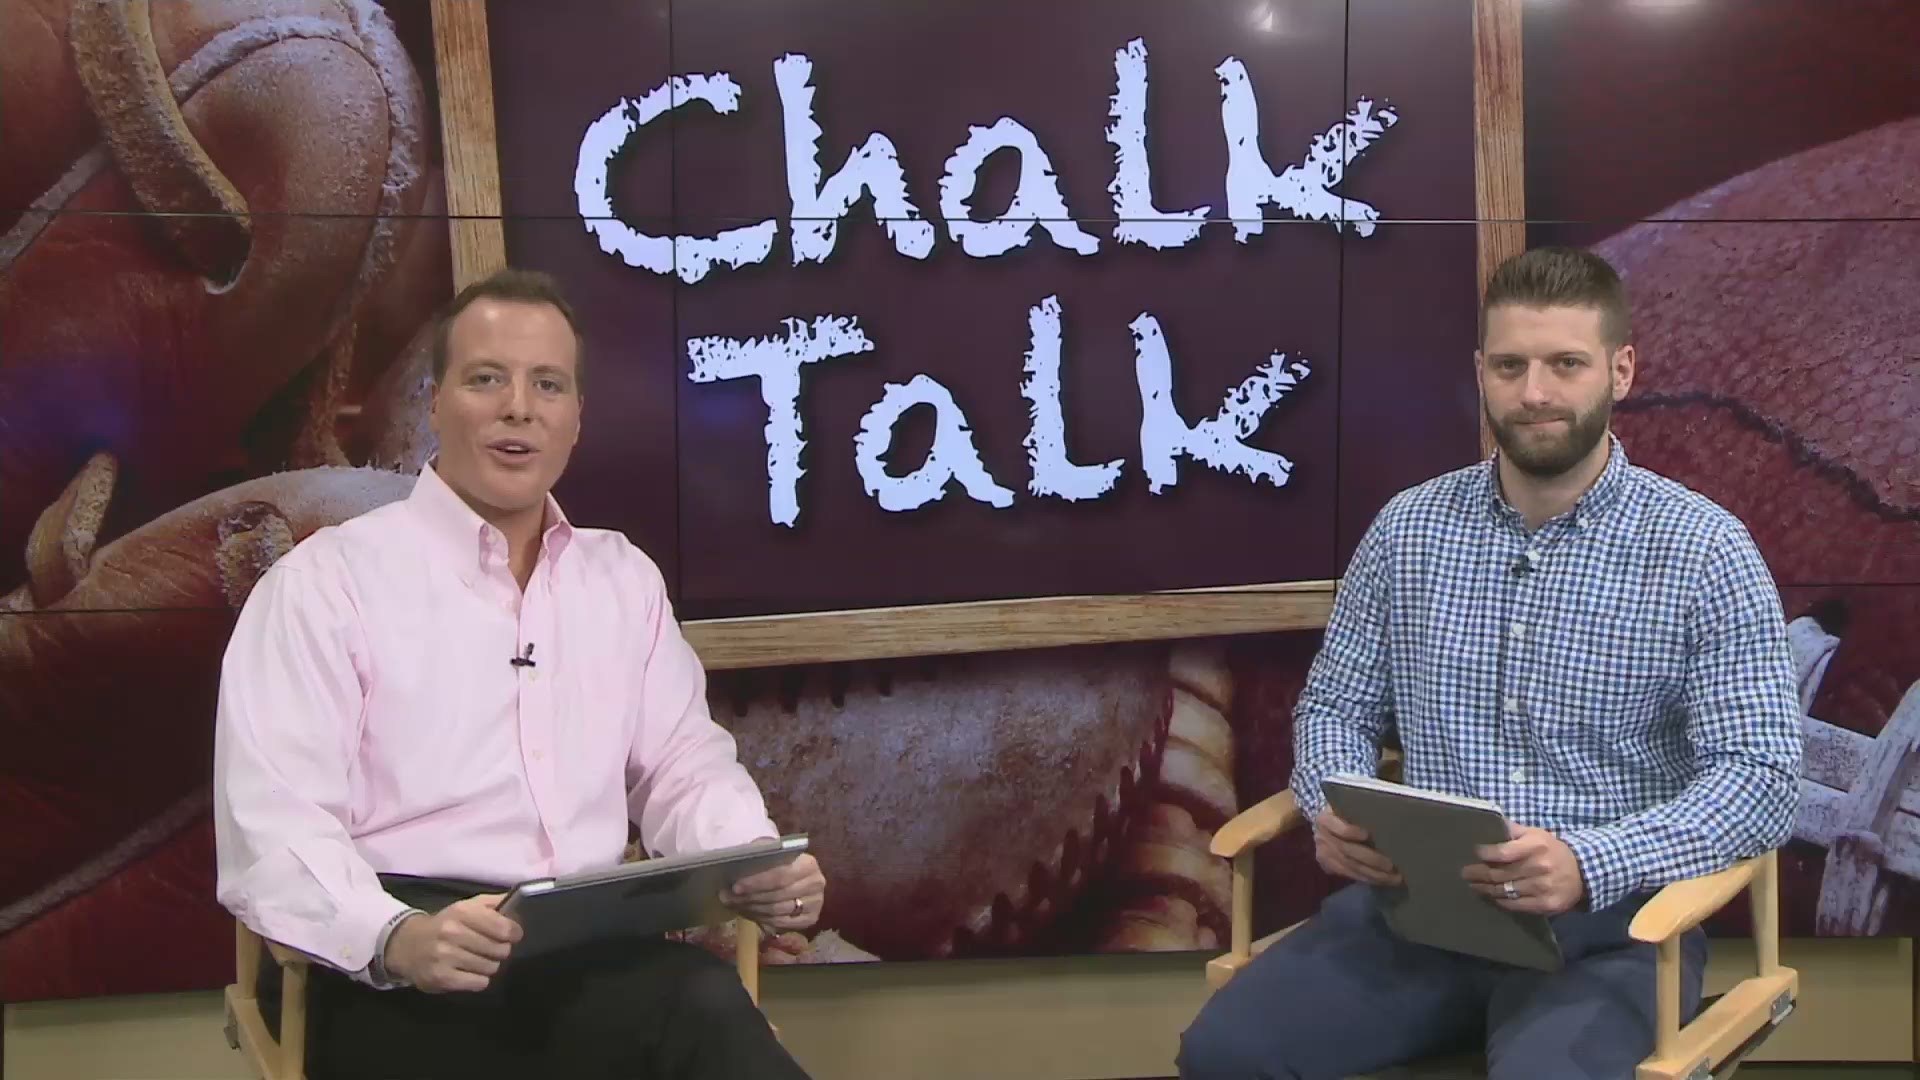 Episode 2 is here!  On the second episode of WKYC's Chalk Talk, Nick Camino and Ben Axelrod discuss and make their picks of Week 3 of the college football season and Week 2 of the NFL.